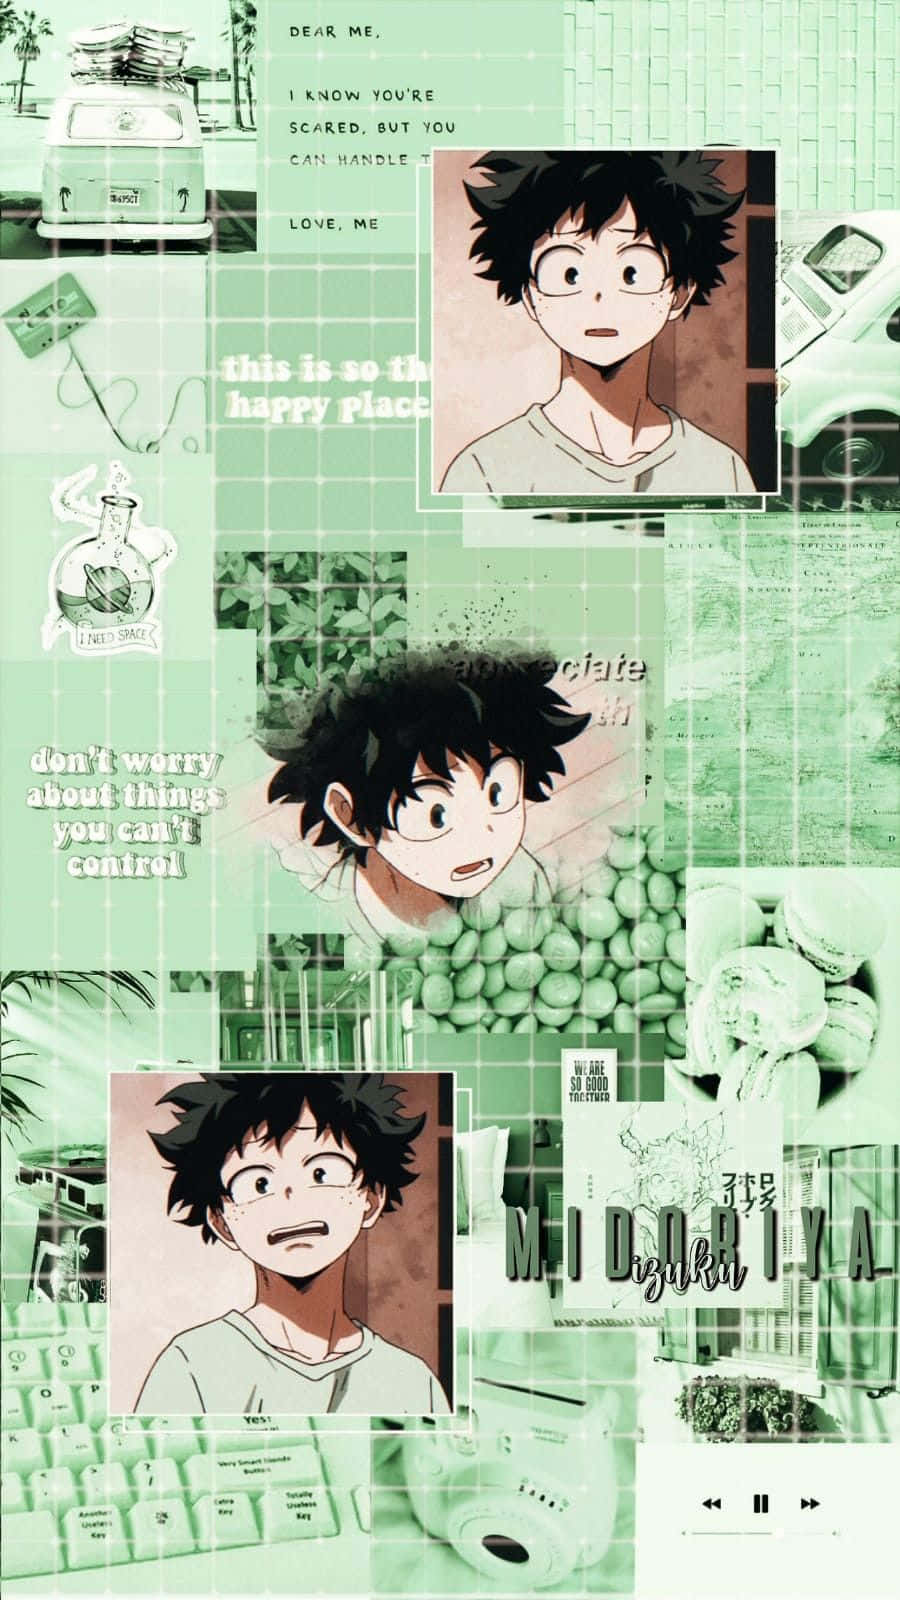 "Deku spreading positive vibes and smiles!" Wallpaper